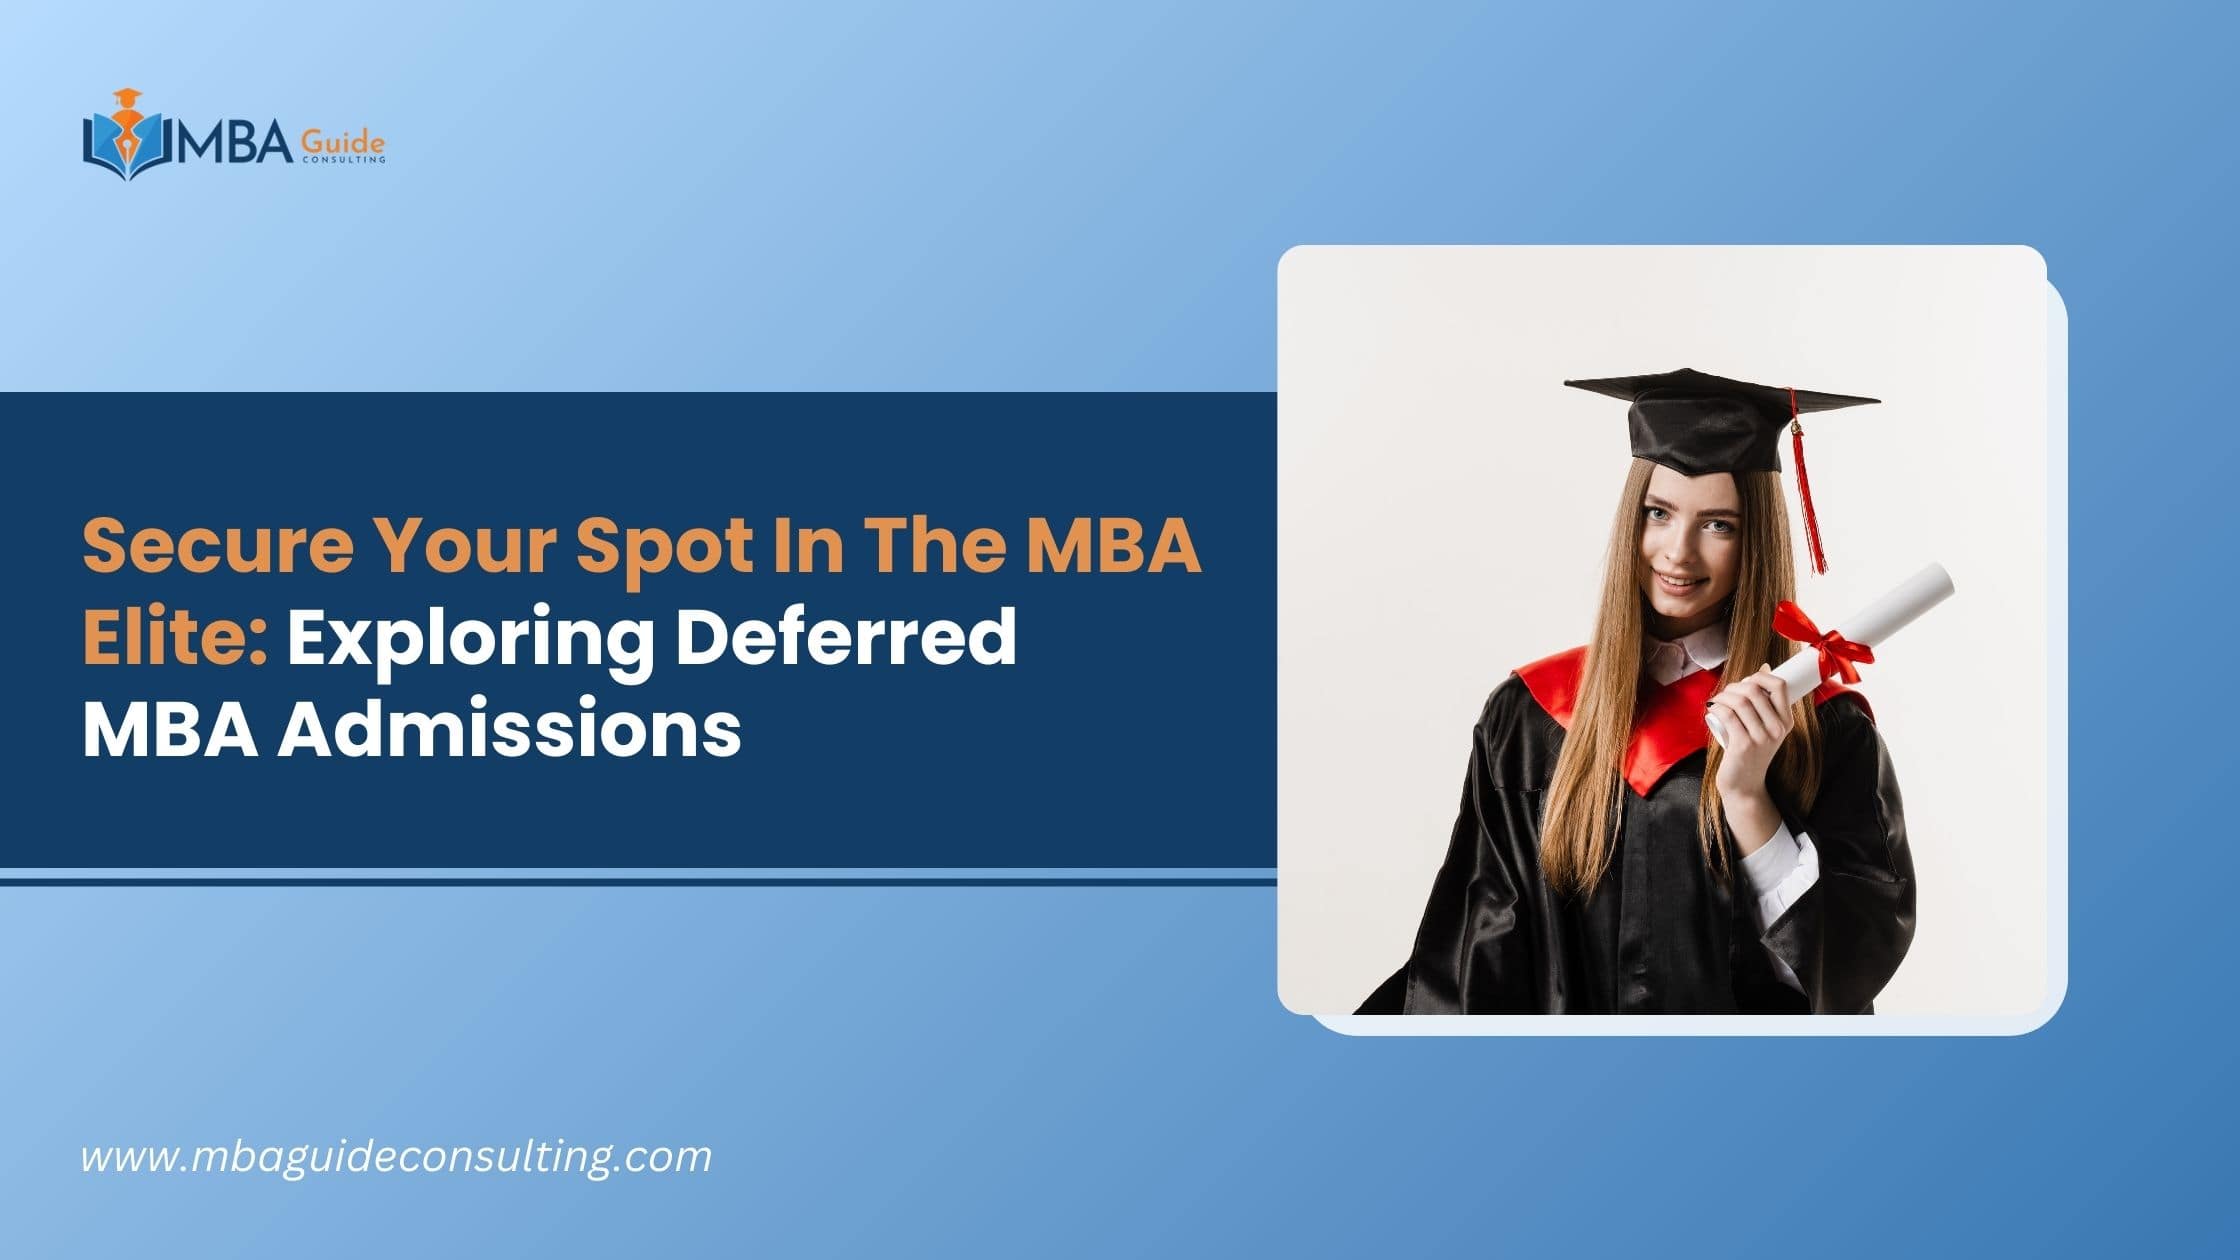 Secure Your Spot in the MBA Elite: Exploring Deferred MBA Admissions